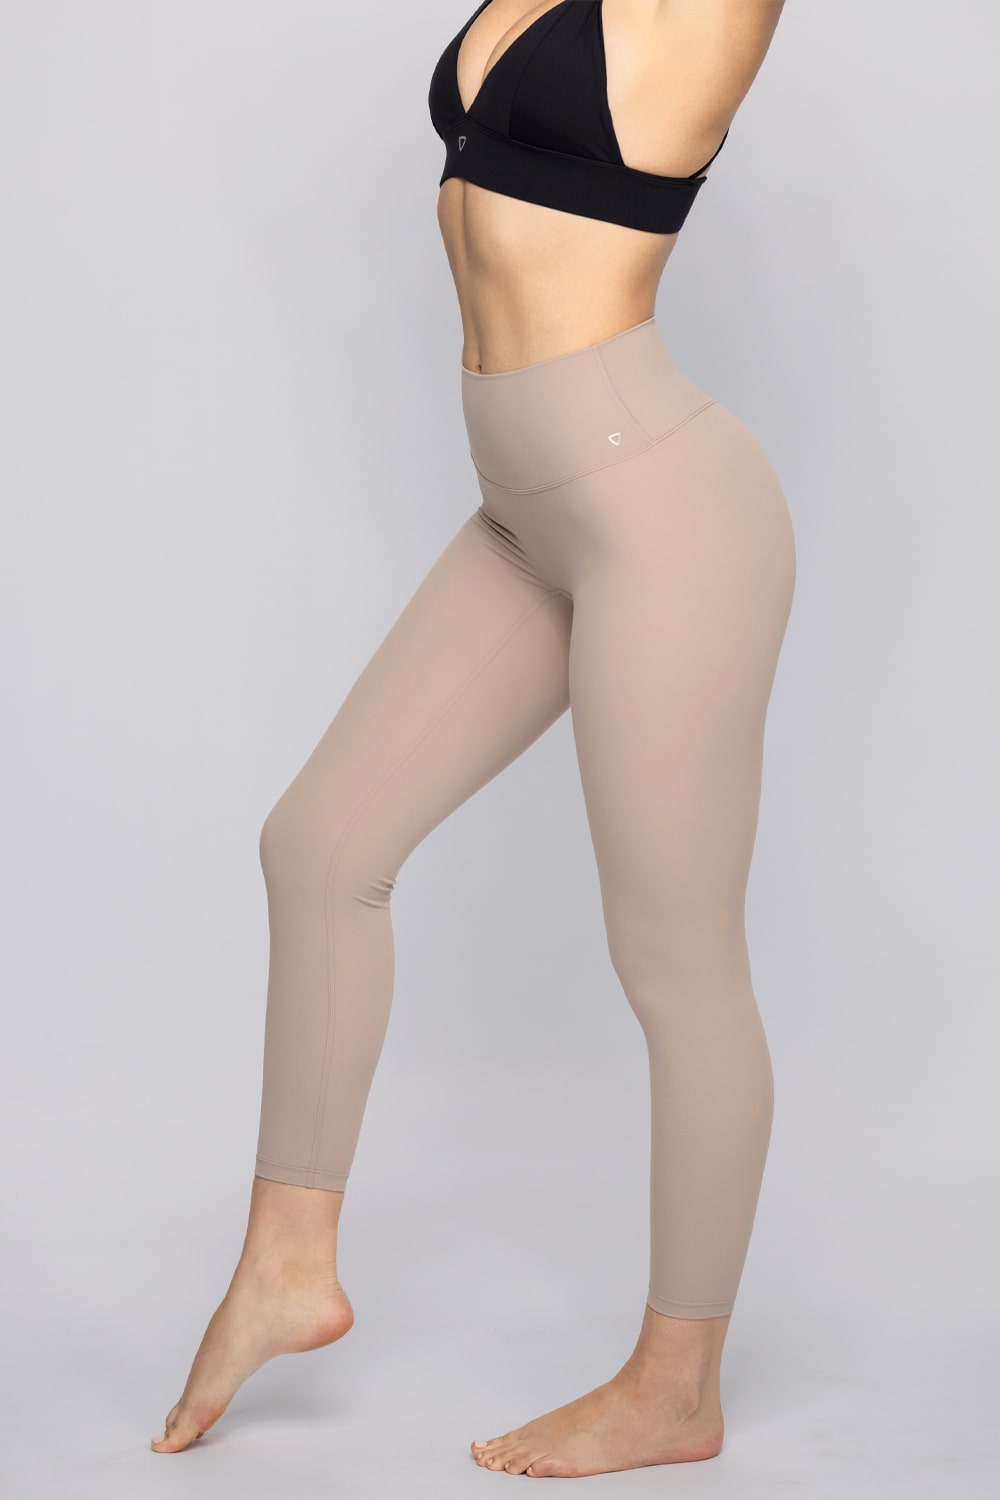 Divinity x Luxana Beige Bliss Outfit